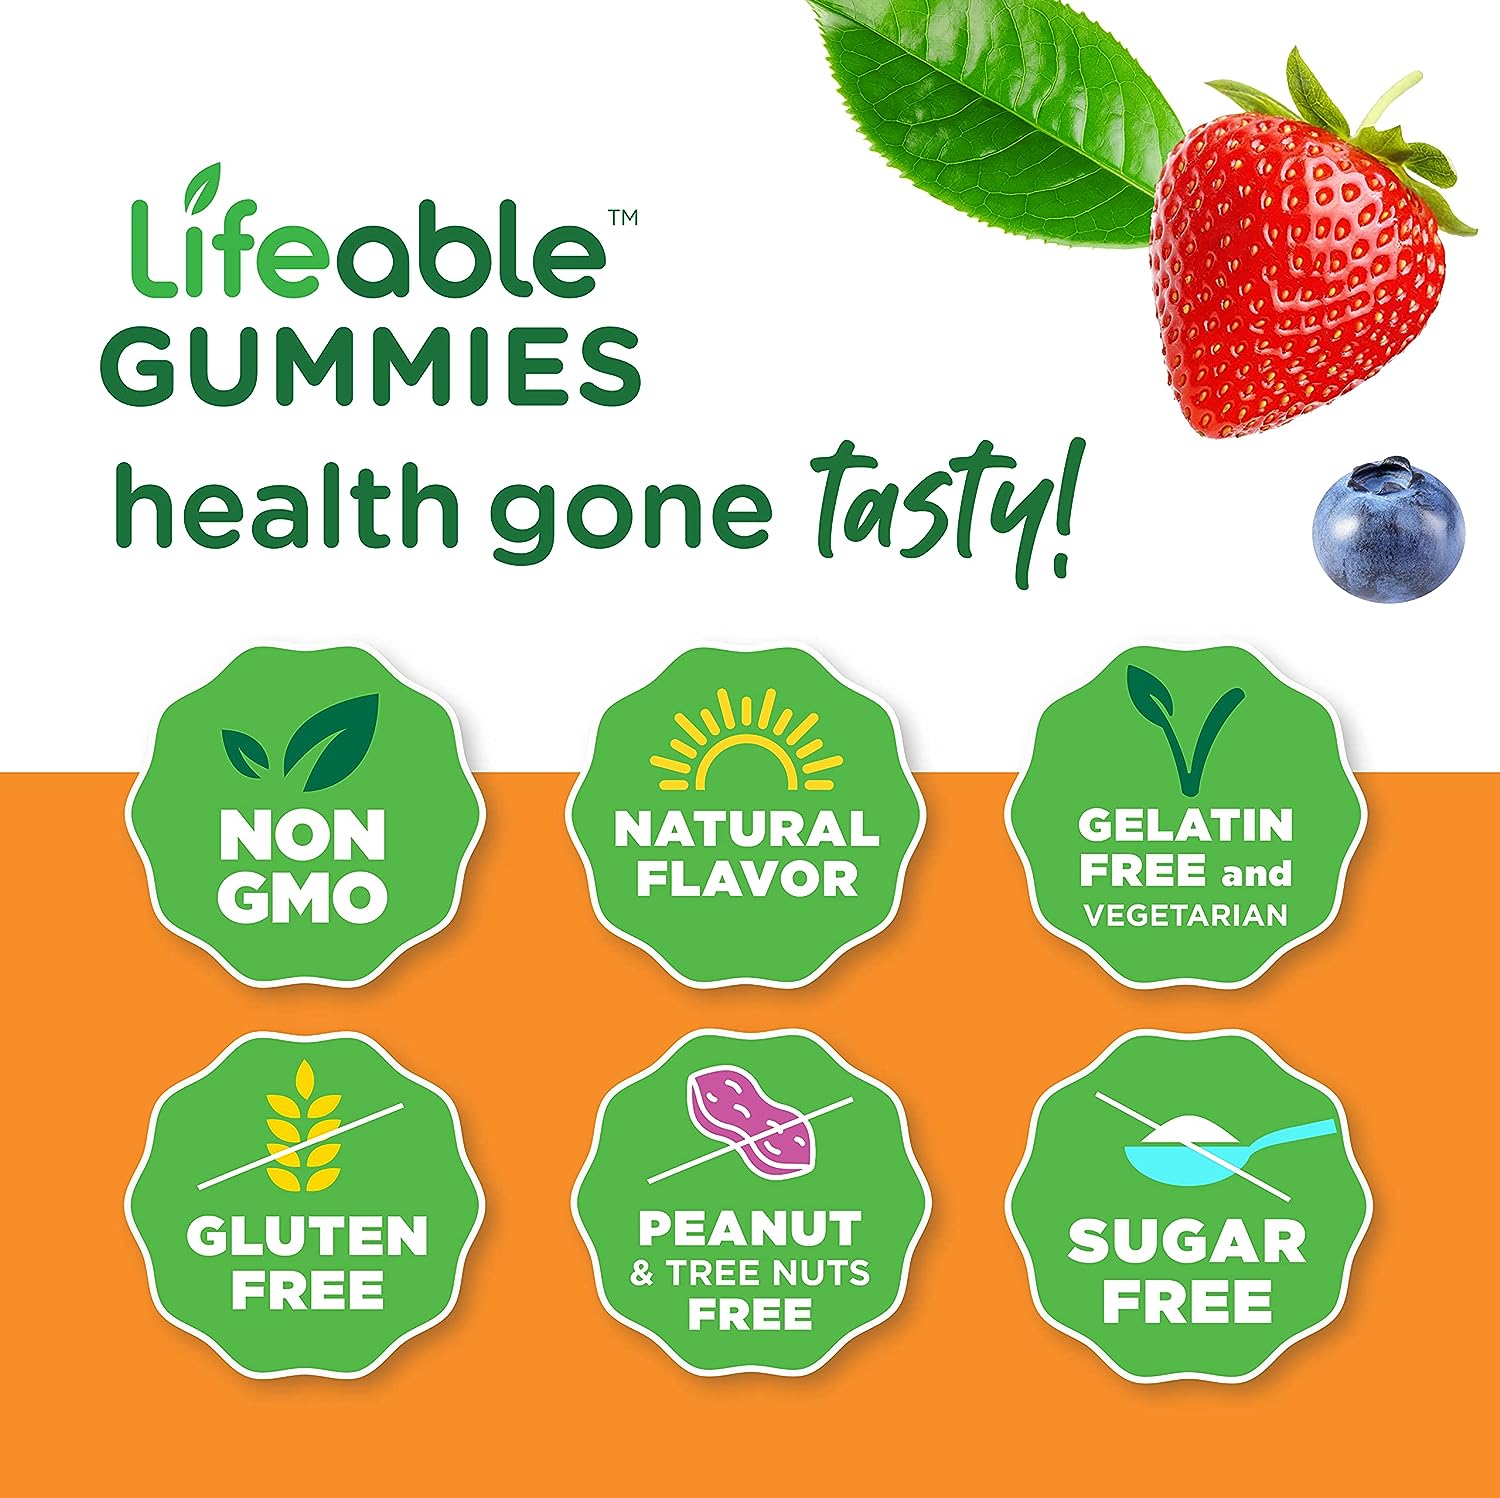 Lifeable Sugar Free Prebiotics Fiber for Kids - 4g - Great Tasting Natural Flavored Gummy Supplement - Keto Friendly - Gluten Free, Vegetarian, GMO Free - for Gut and Digestive Health - 90 Gummies : Health & Household